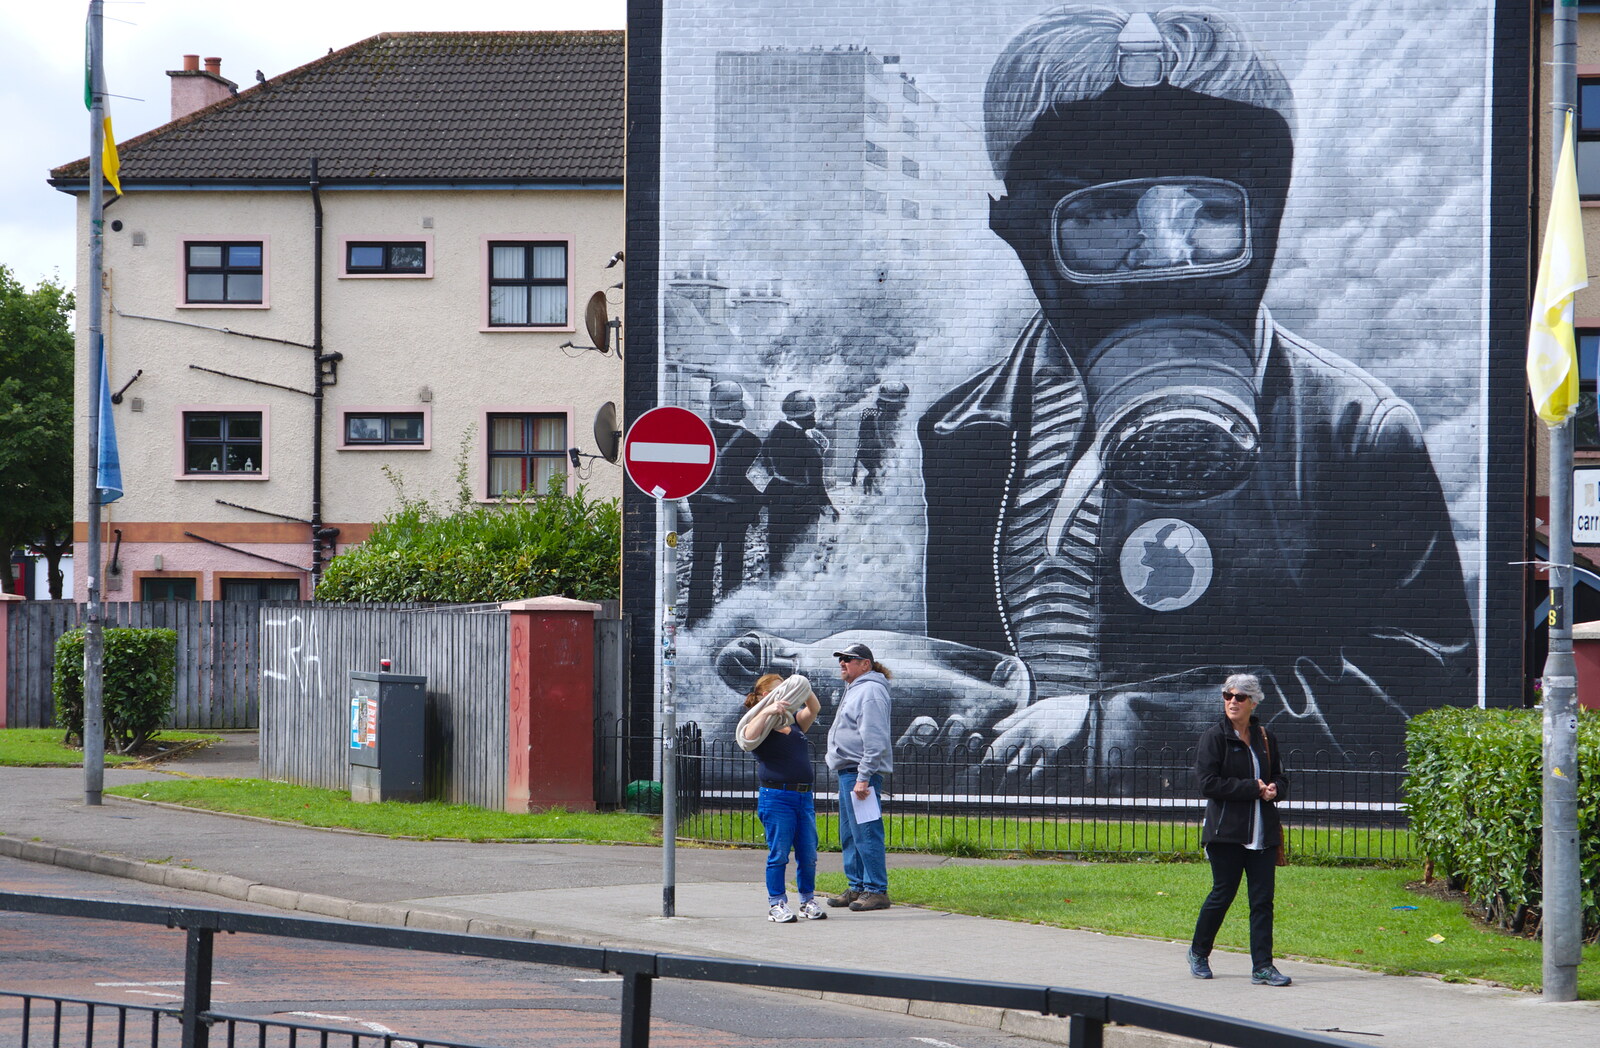 Tourists wander around by the Battle of the Bogside  from A Day in Derry, County Londonderry, Northern Ireland - 15th August 2019